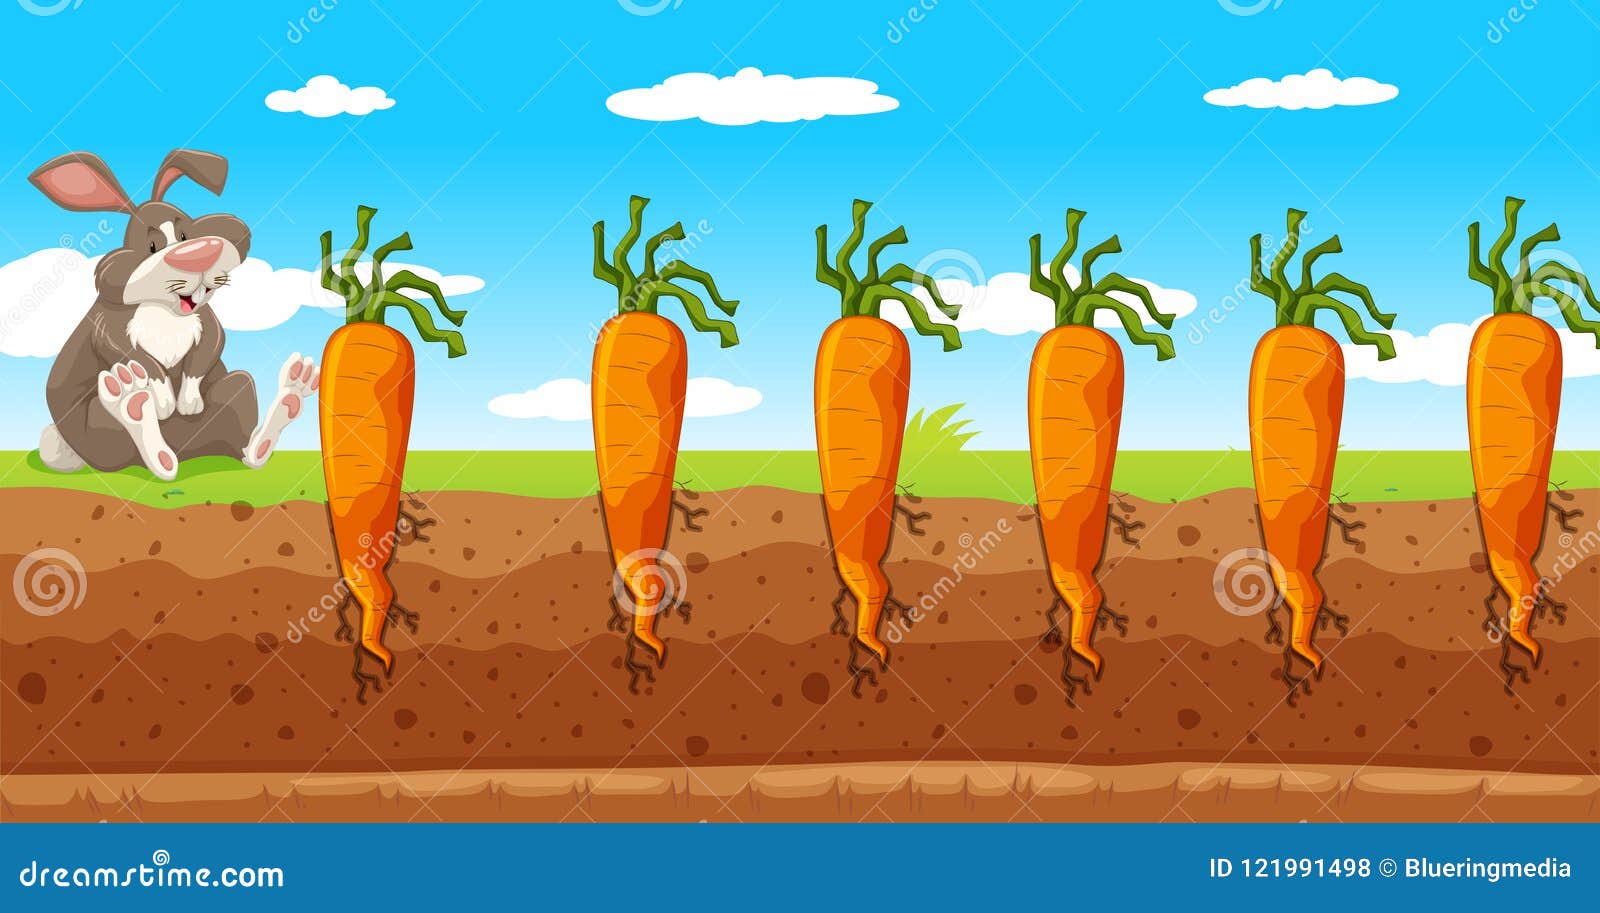 A Bunny in Carrot Farm stock vector. Illustration of clipart - 121991498